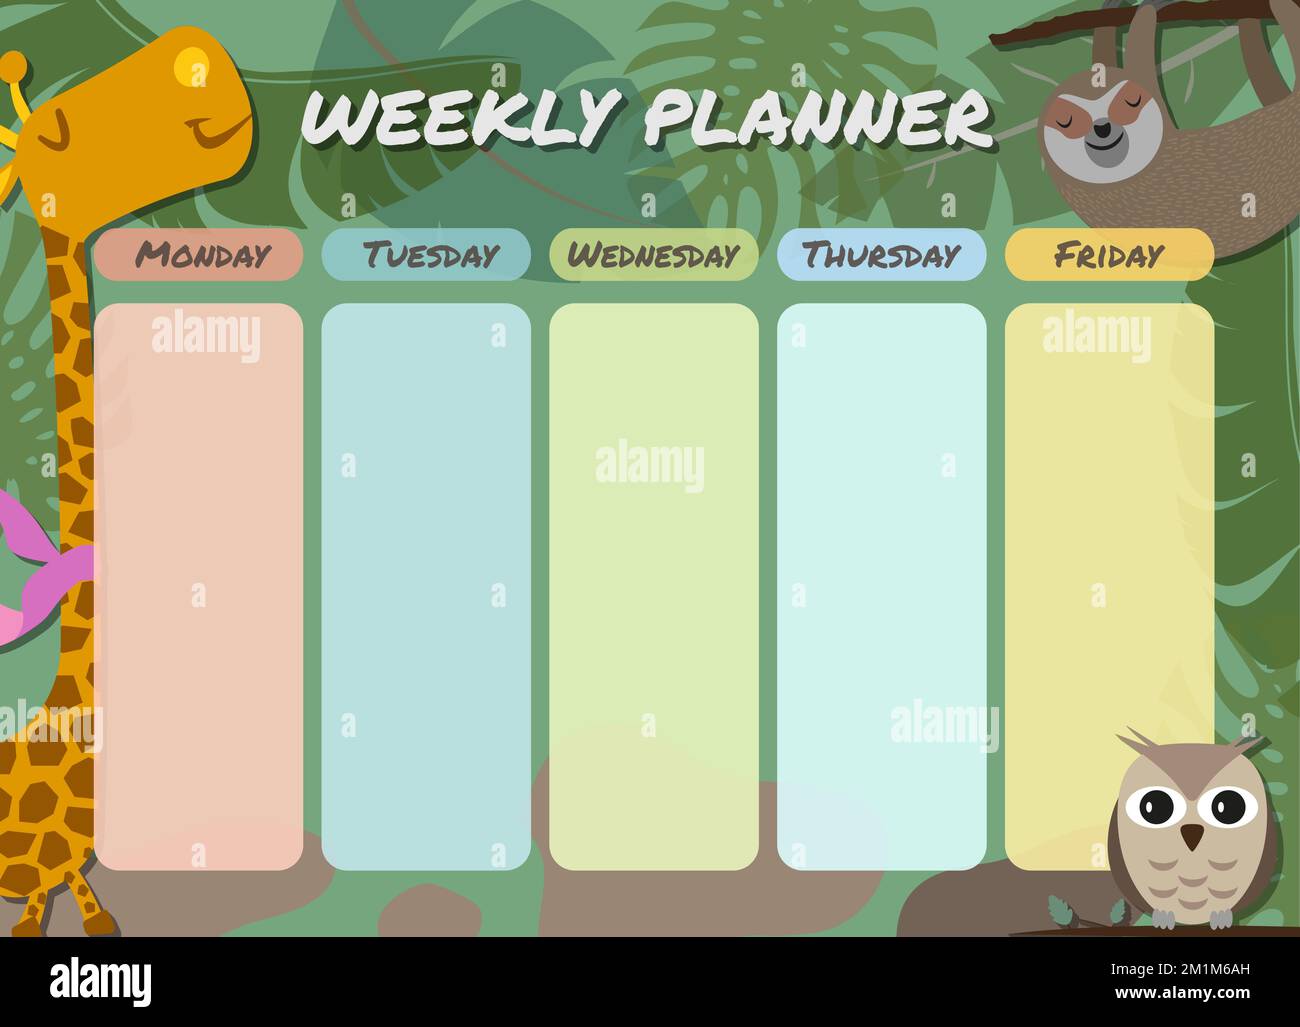 colorful weekly planner school schedule template for children with giraffe, owl and sloth, vector illustration Stock Vector